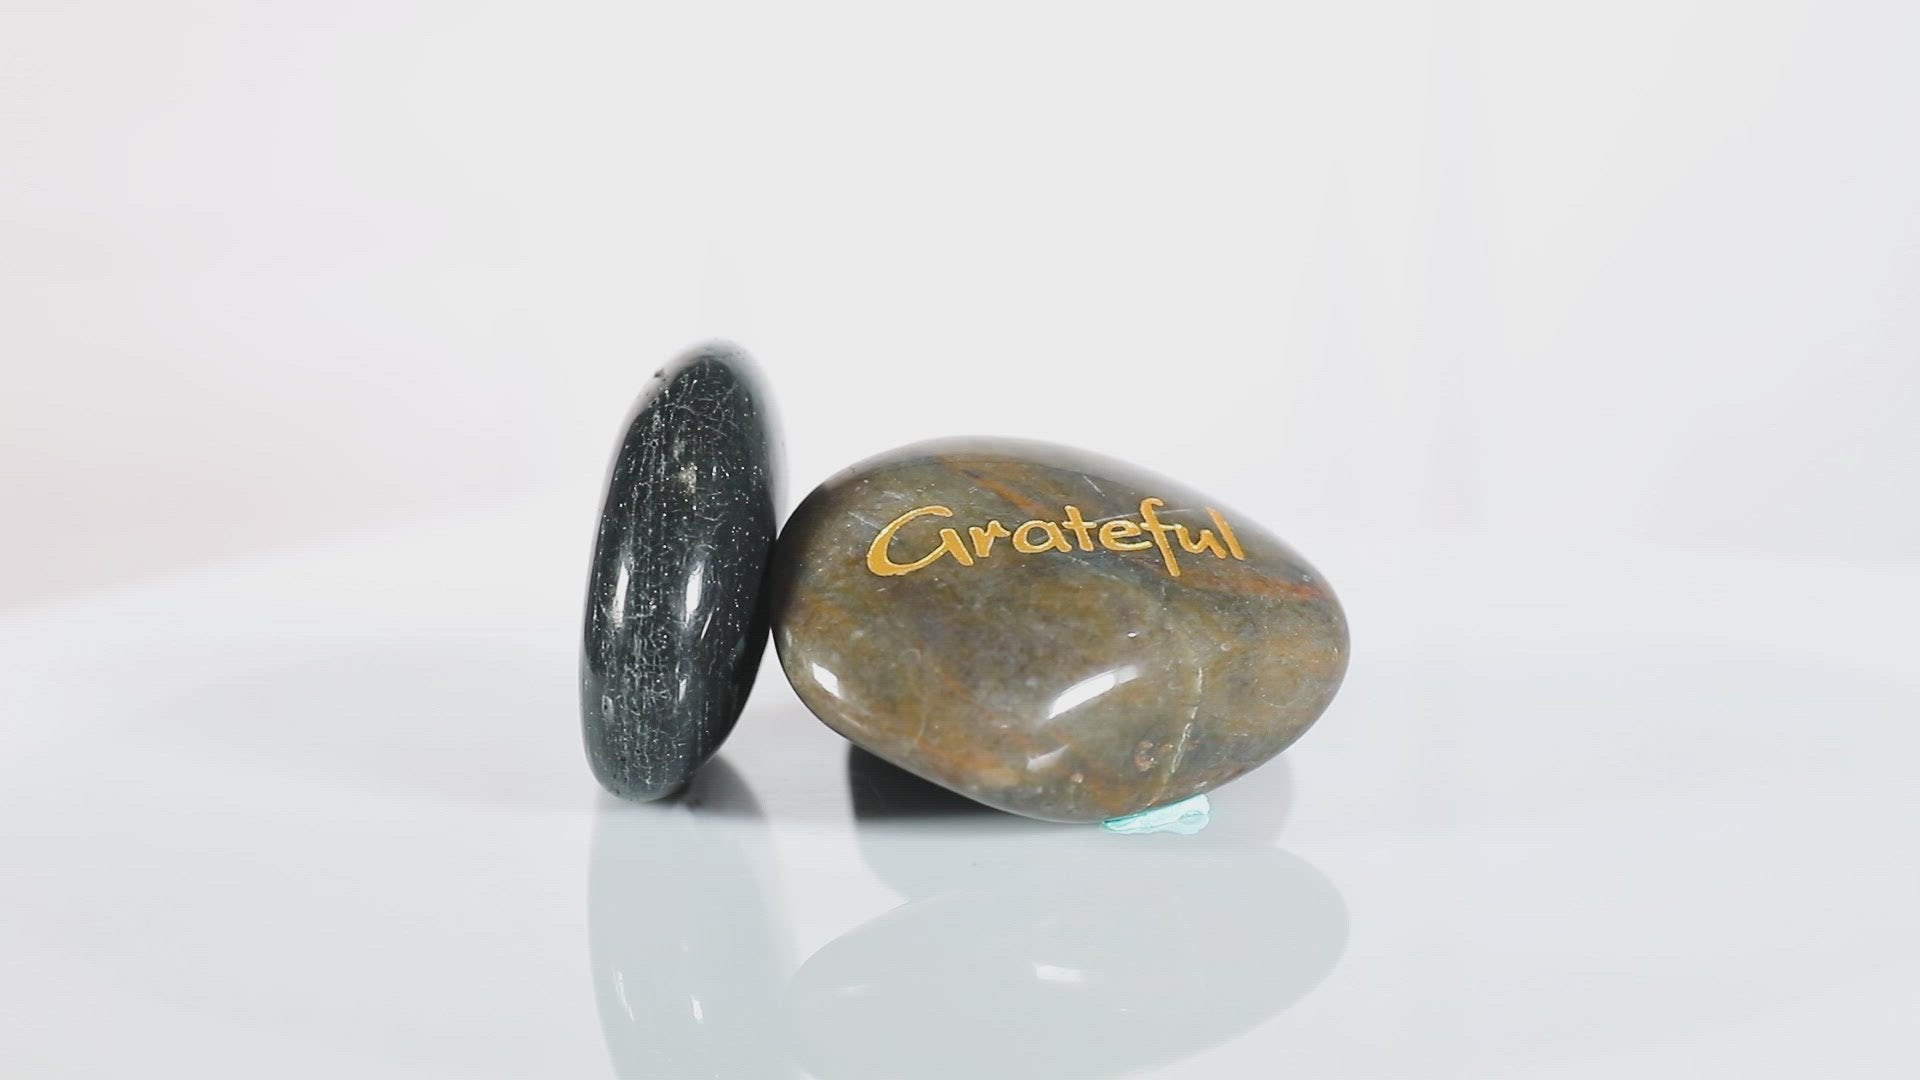 You Rock!™  Recognition Gift Stones